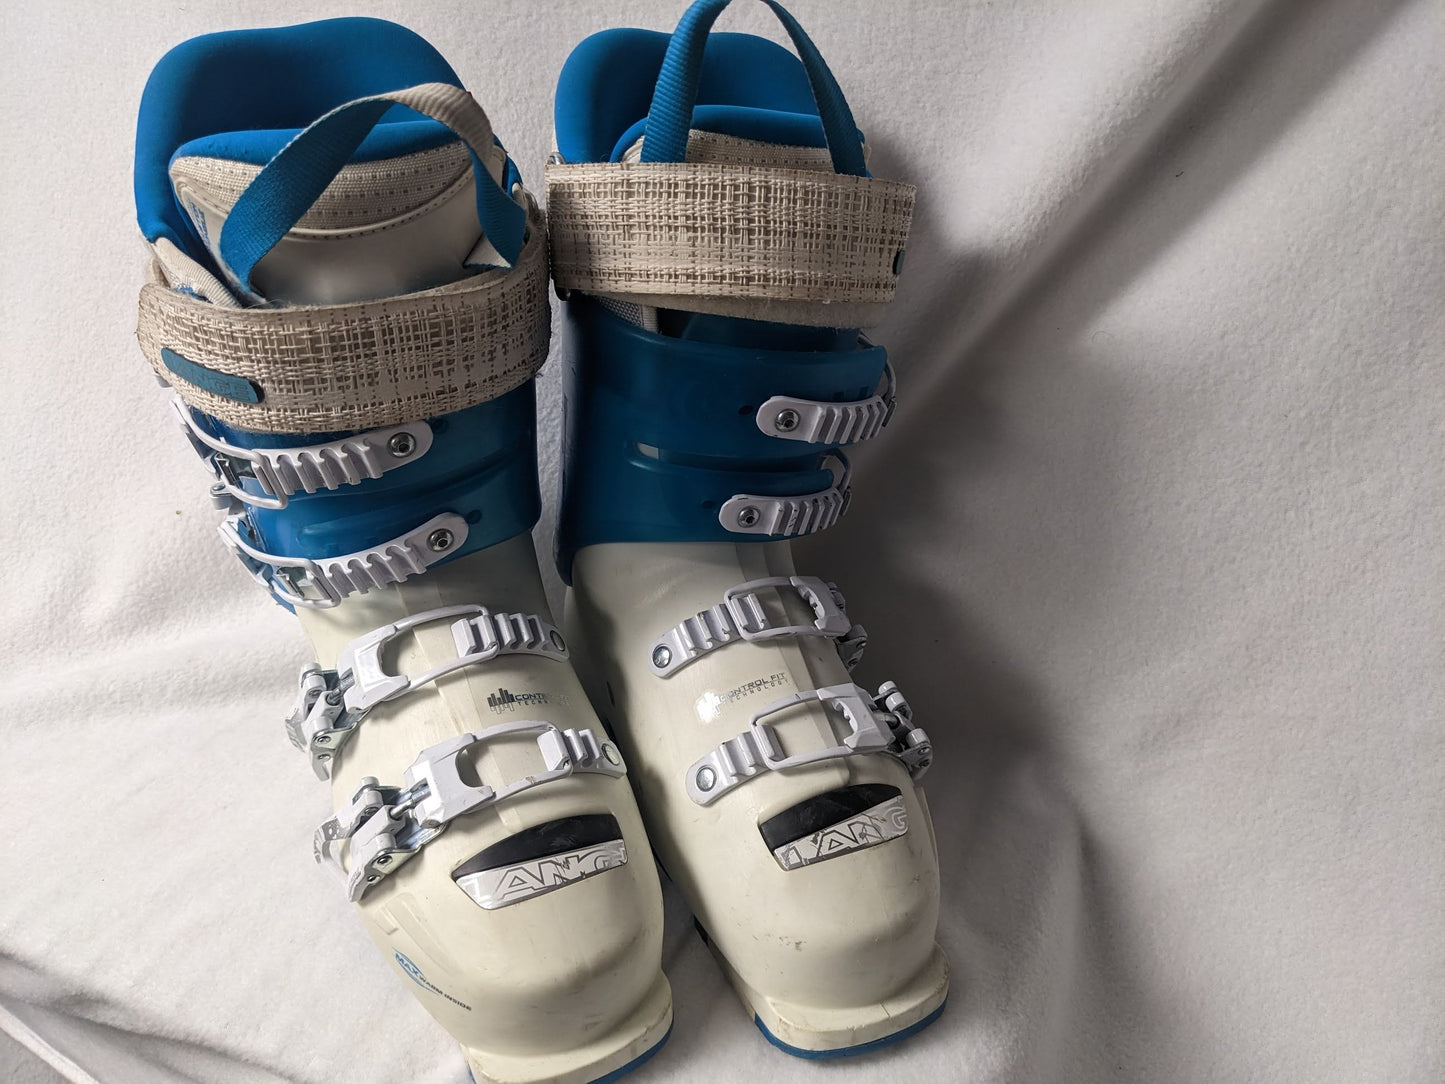 Lange XT 90 Ski Boots Size 23.5 Color White Condition Used